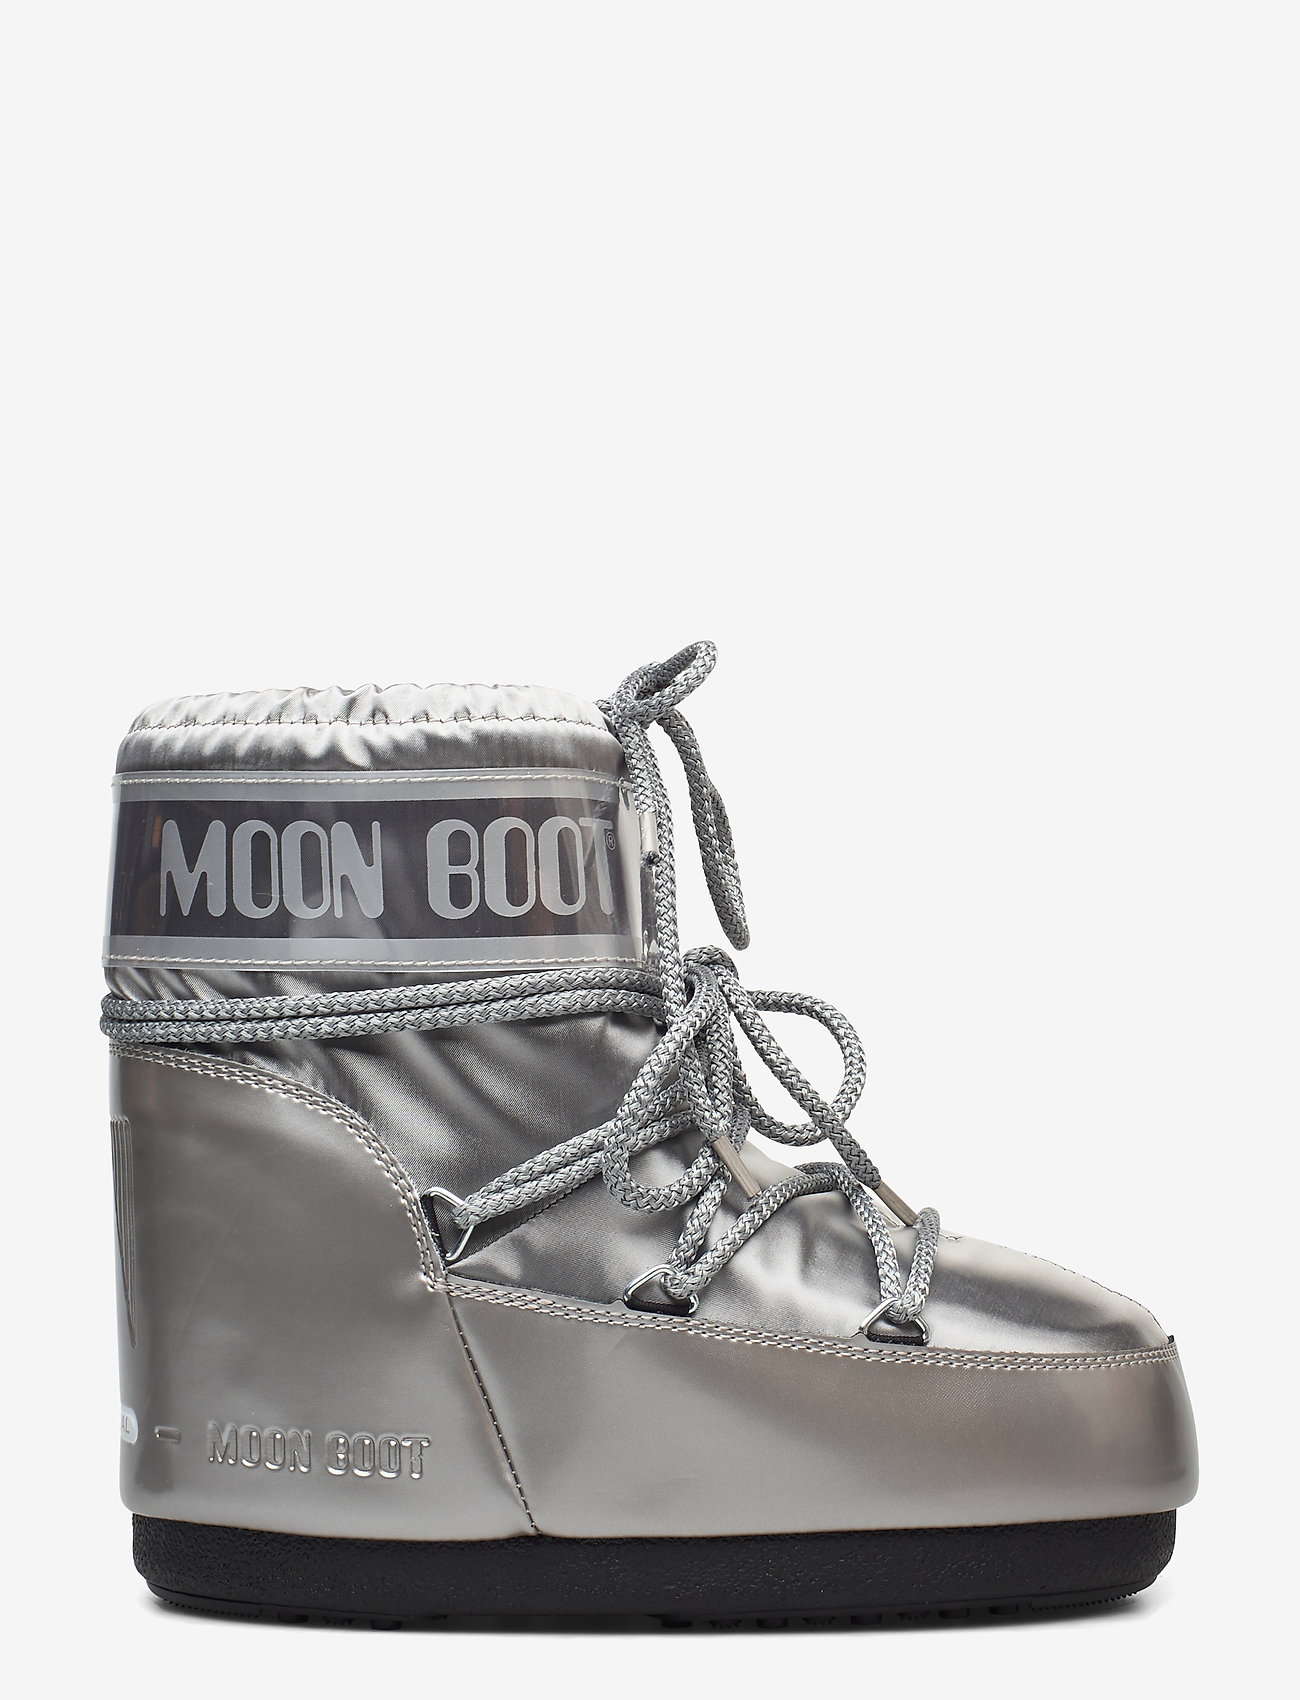 moon boot official site